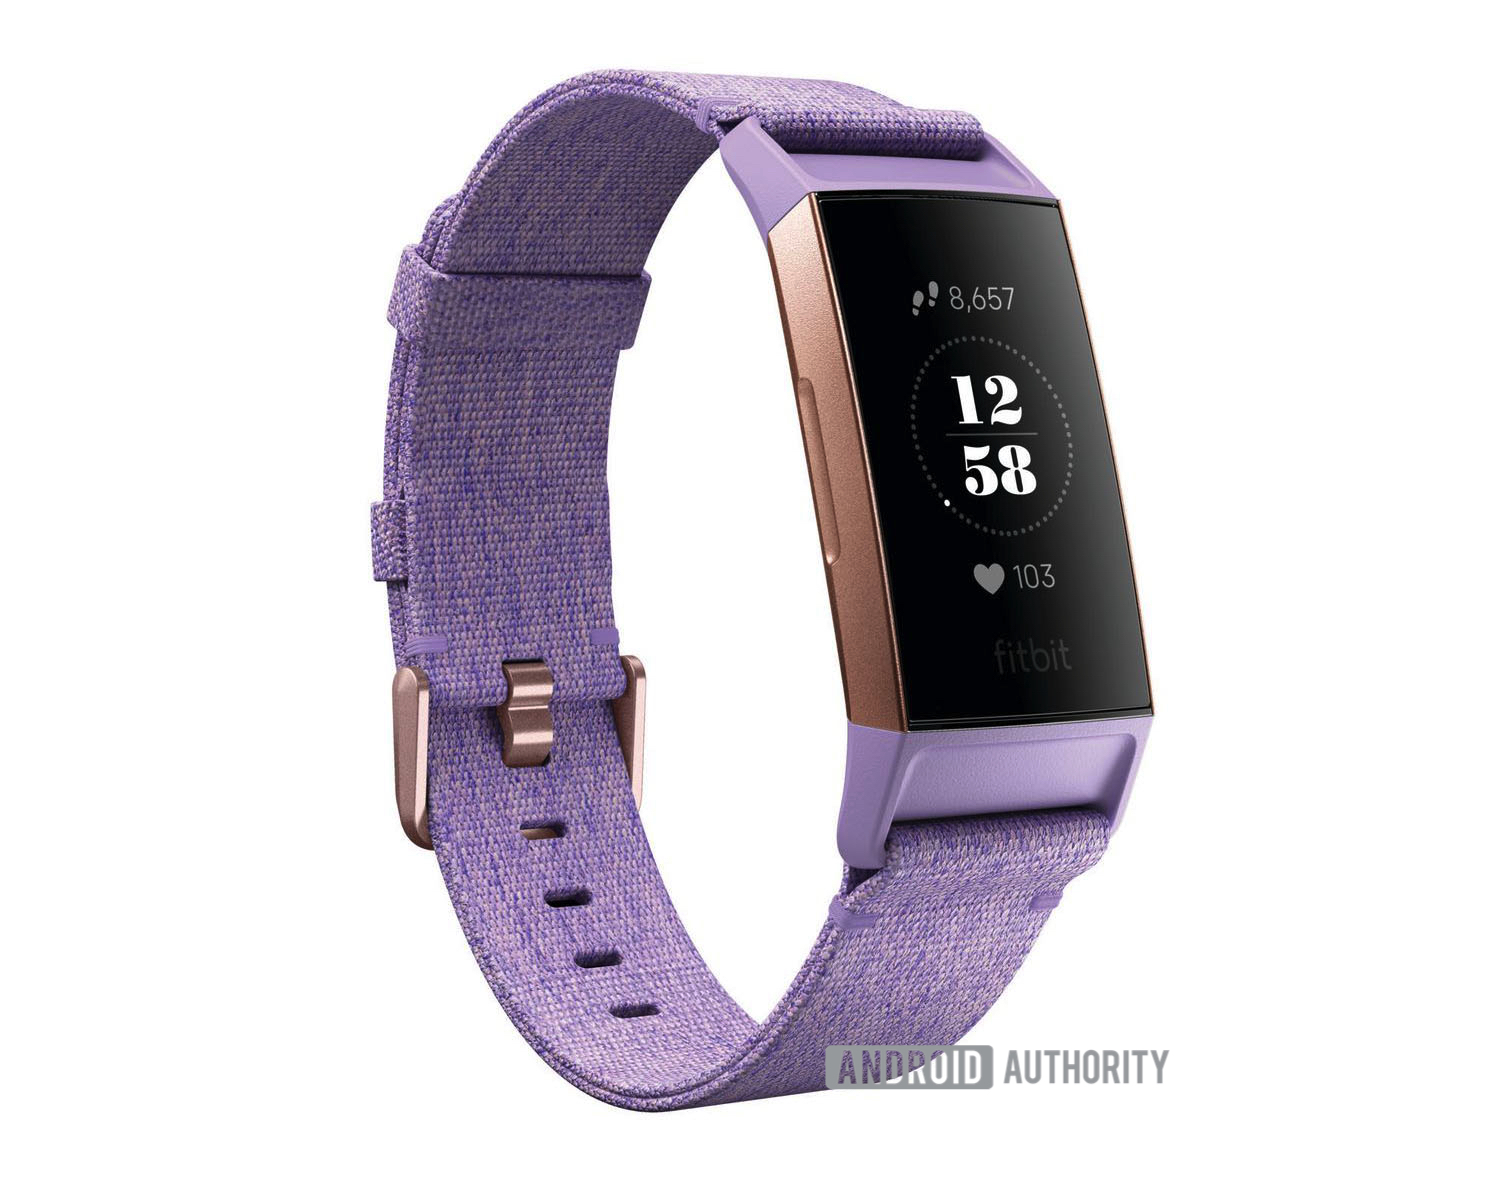 Fitbit Charge 3 rose gold lavender AA 5